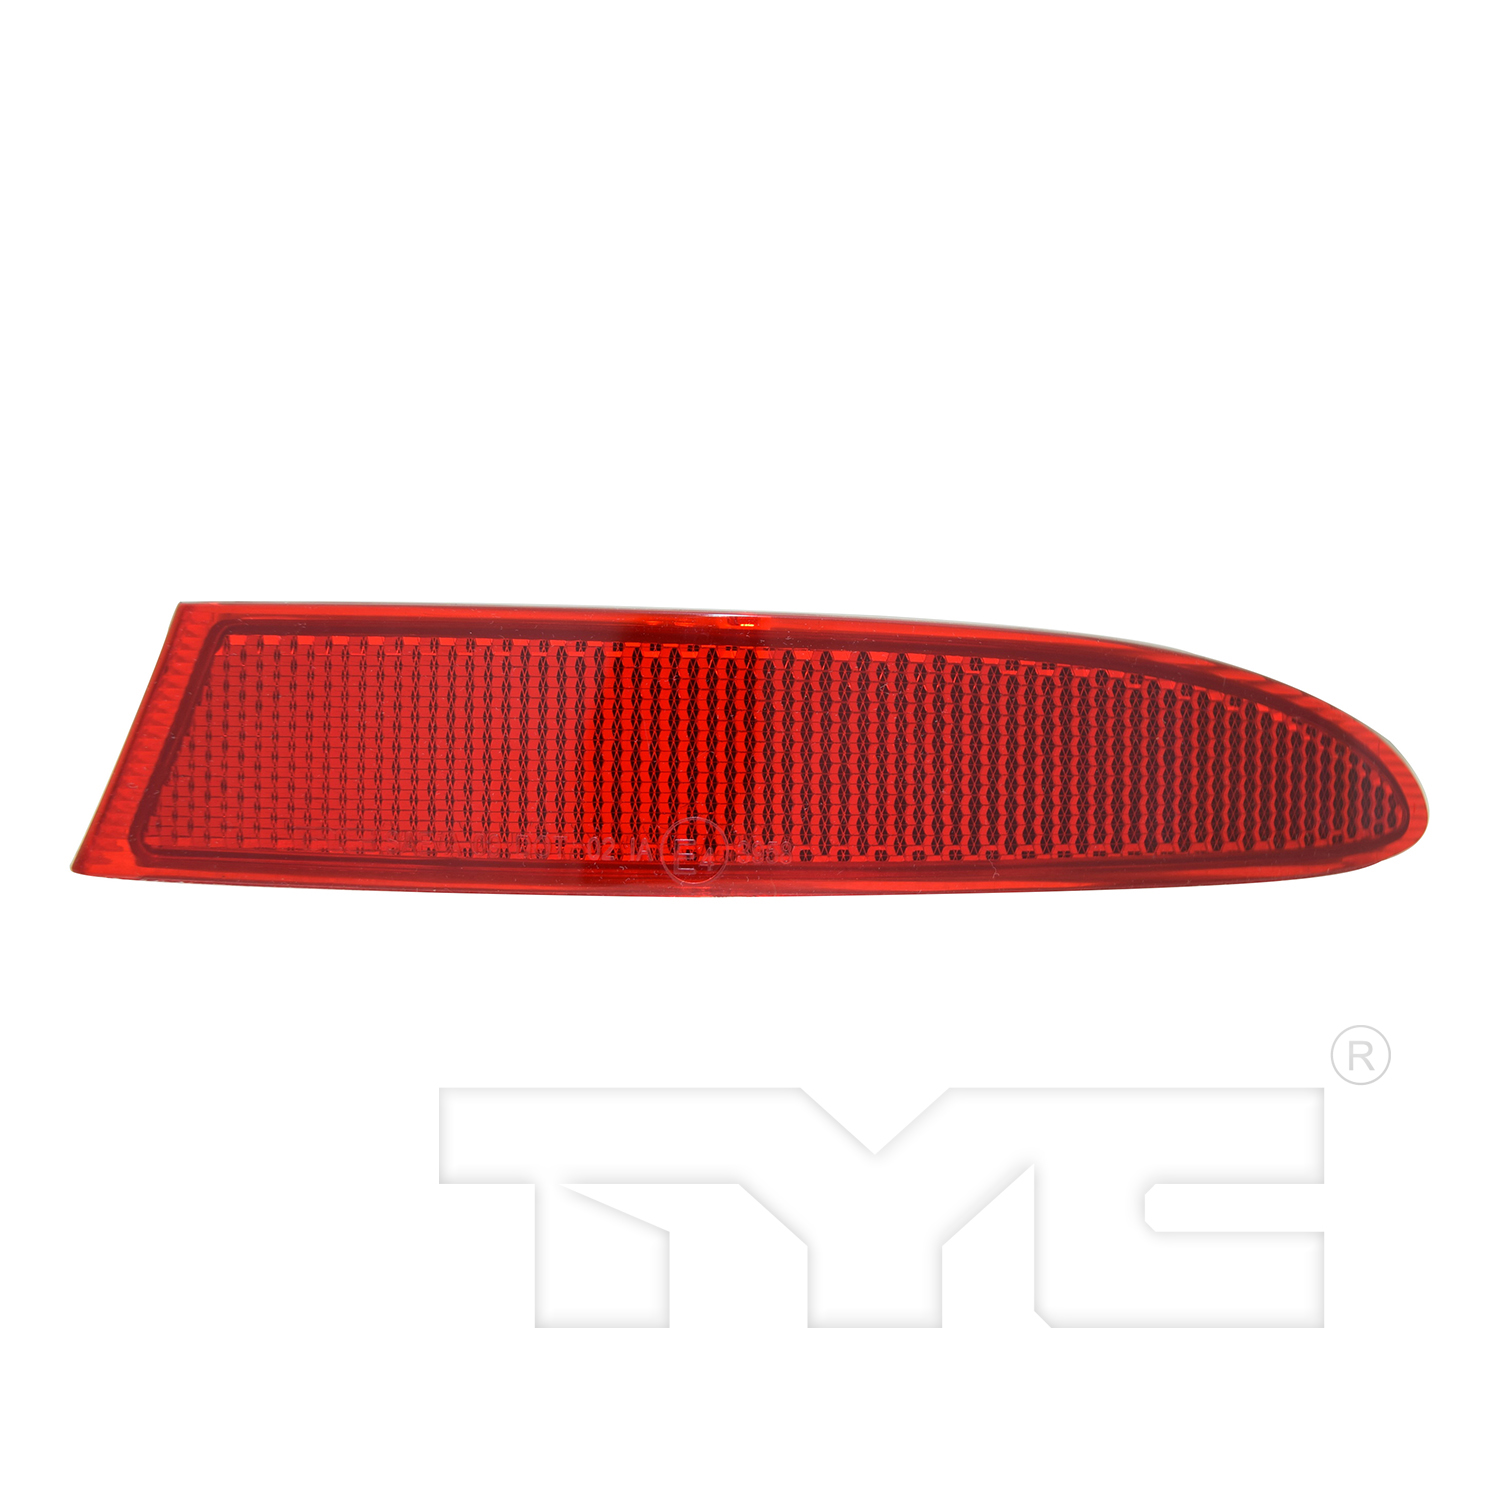 Aftermarket LAMPS for BMW - X3, X3,11-14,RT Rear bumper reflector